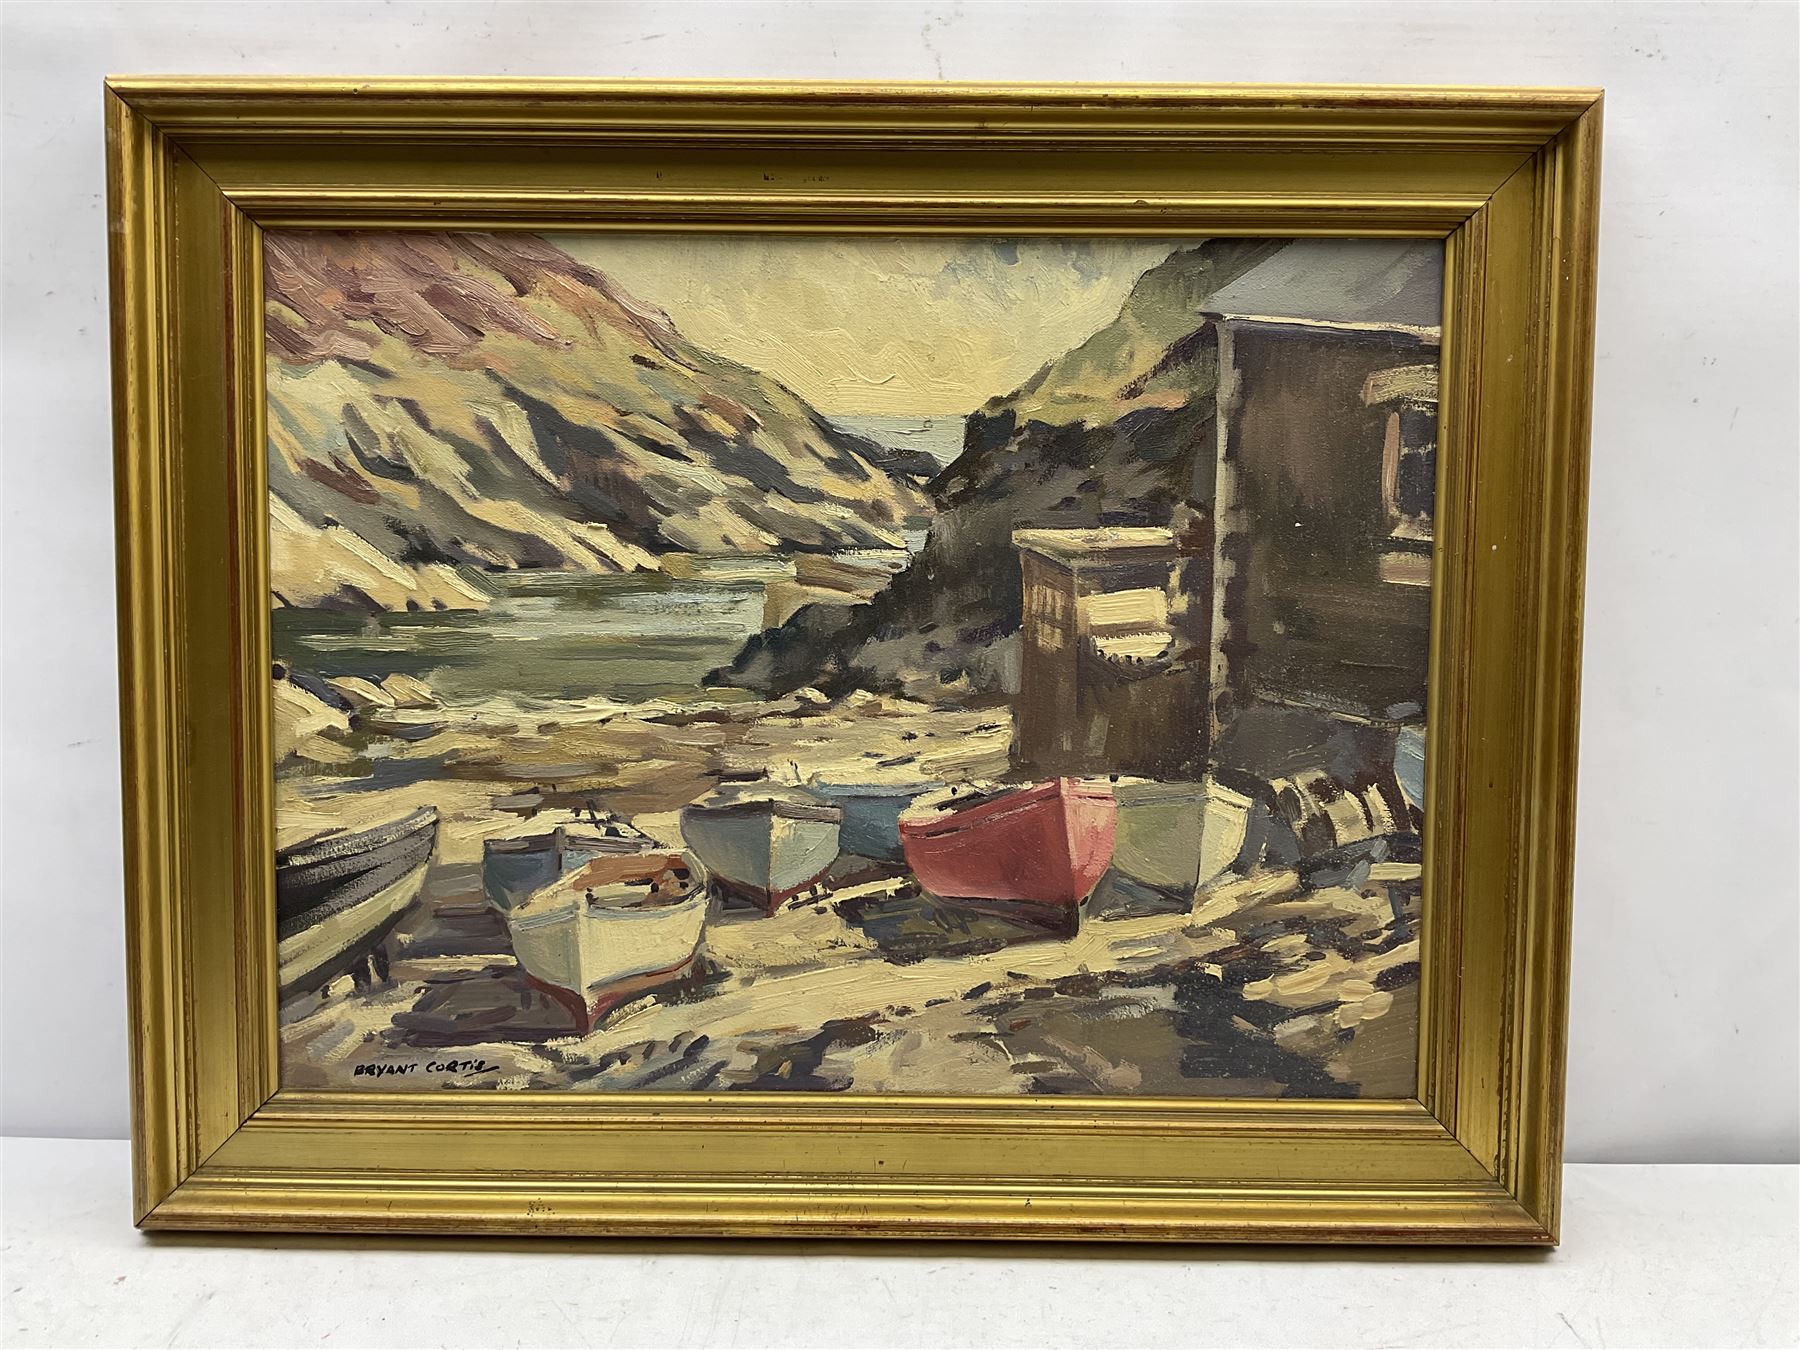 Bryant Cortis (British 20th century): Fishing Boats in a Cove - Image 2 of 4